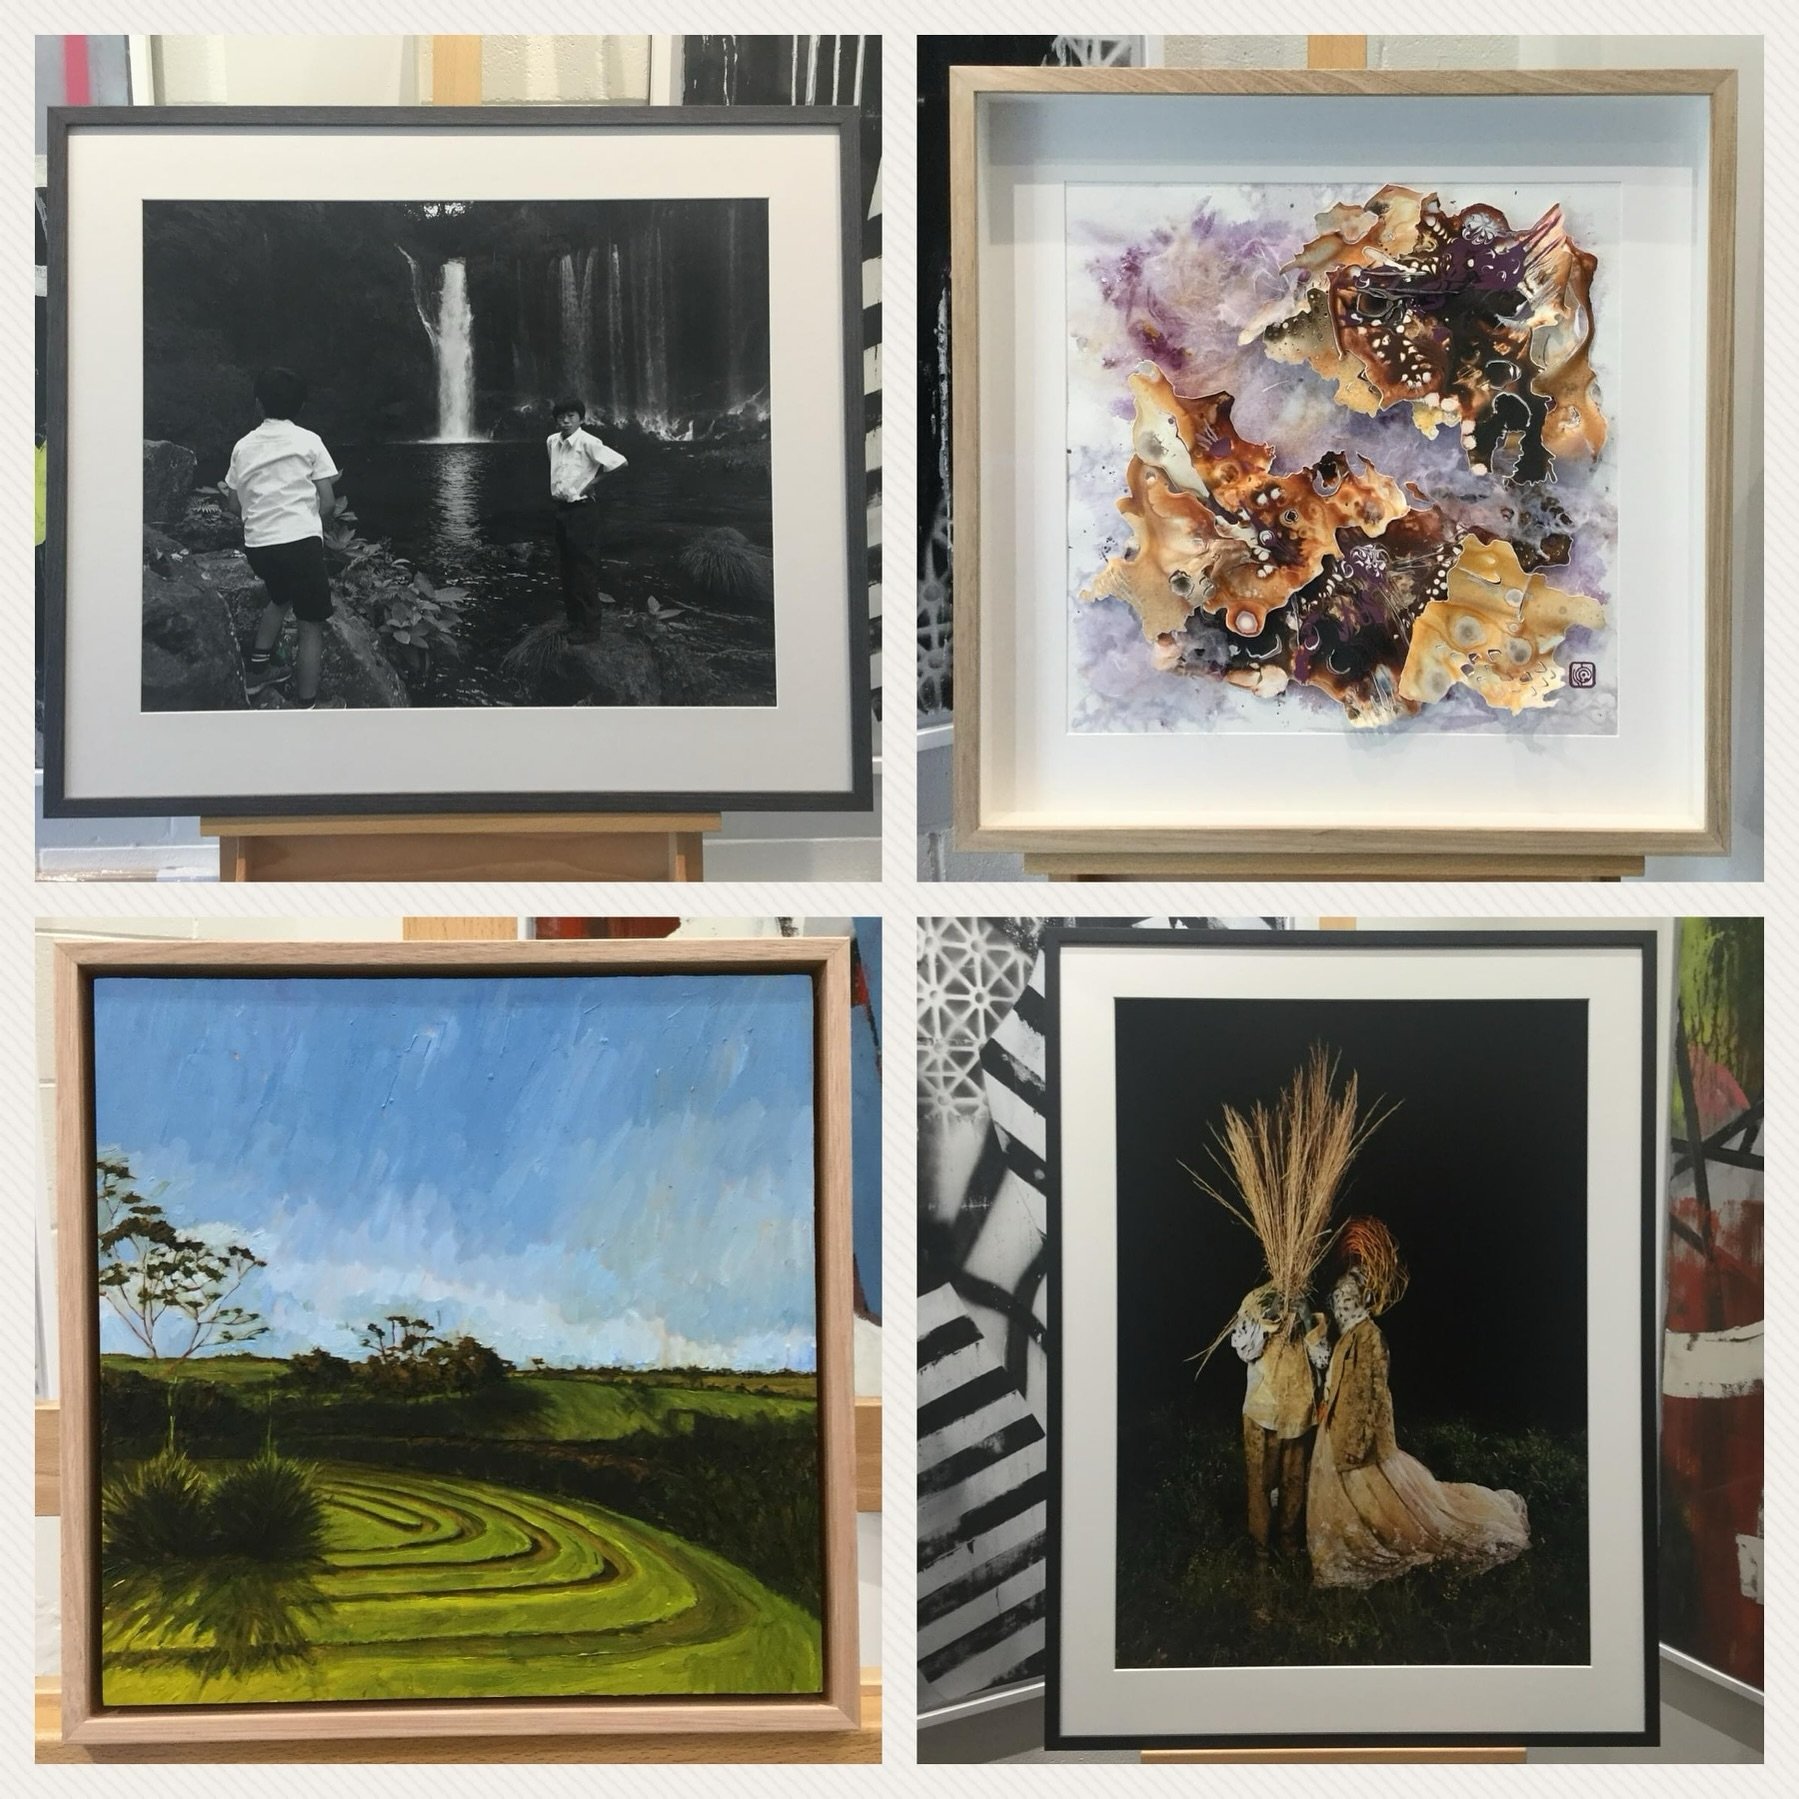 This week&rsquo;s Facebook showcase is jam packed full of wonderful pieces from start to finish. (Link in bio)
Featuring mainly local artwork, it is a great representation of what is happening in our local art scene right now!
Please feel free to tak